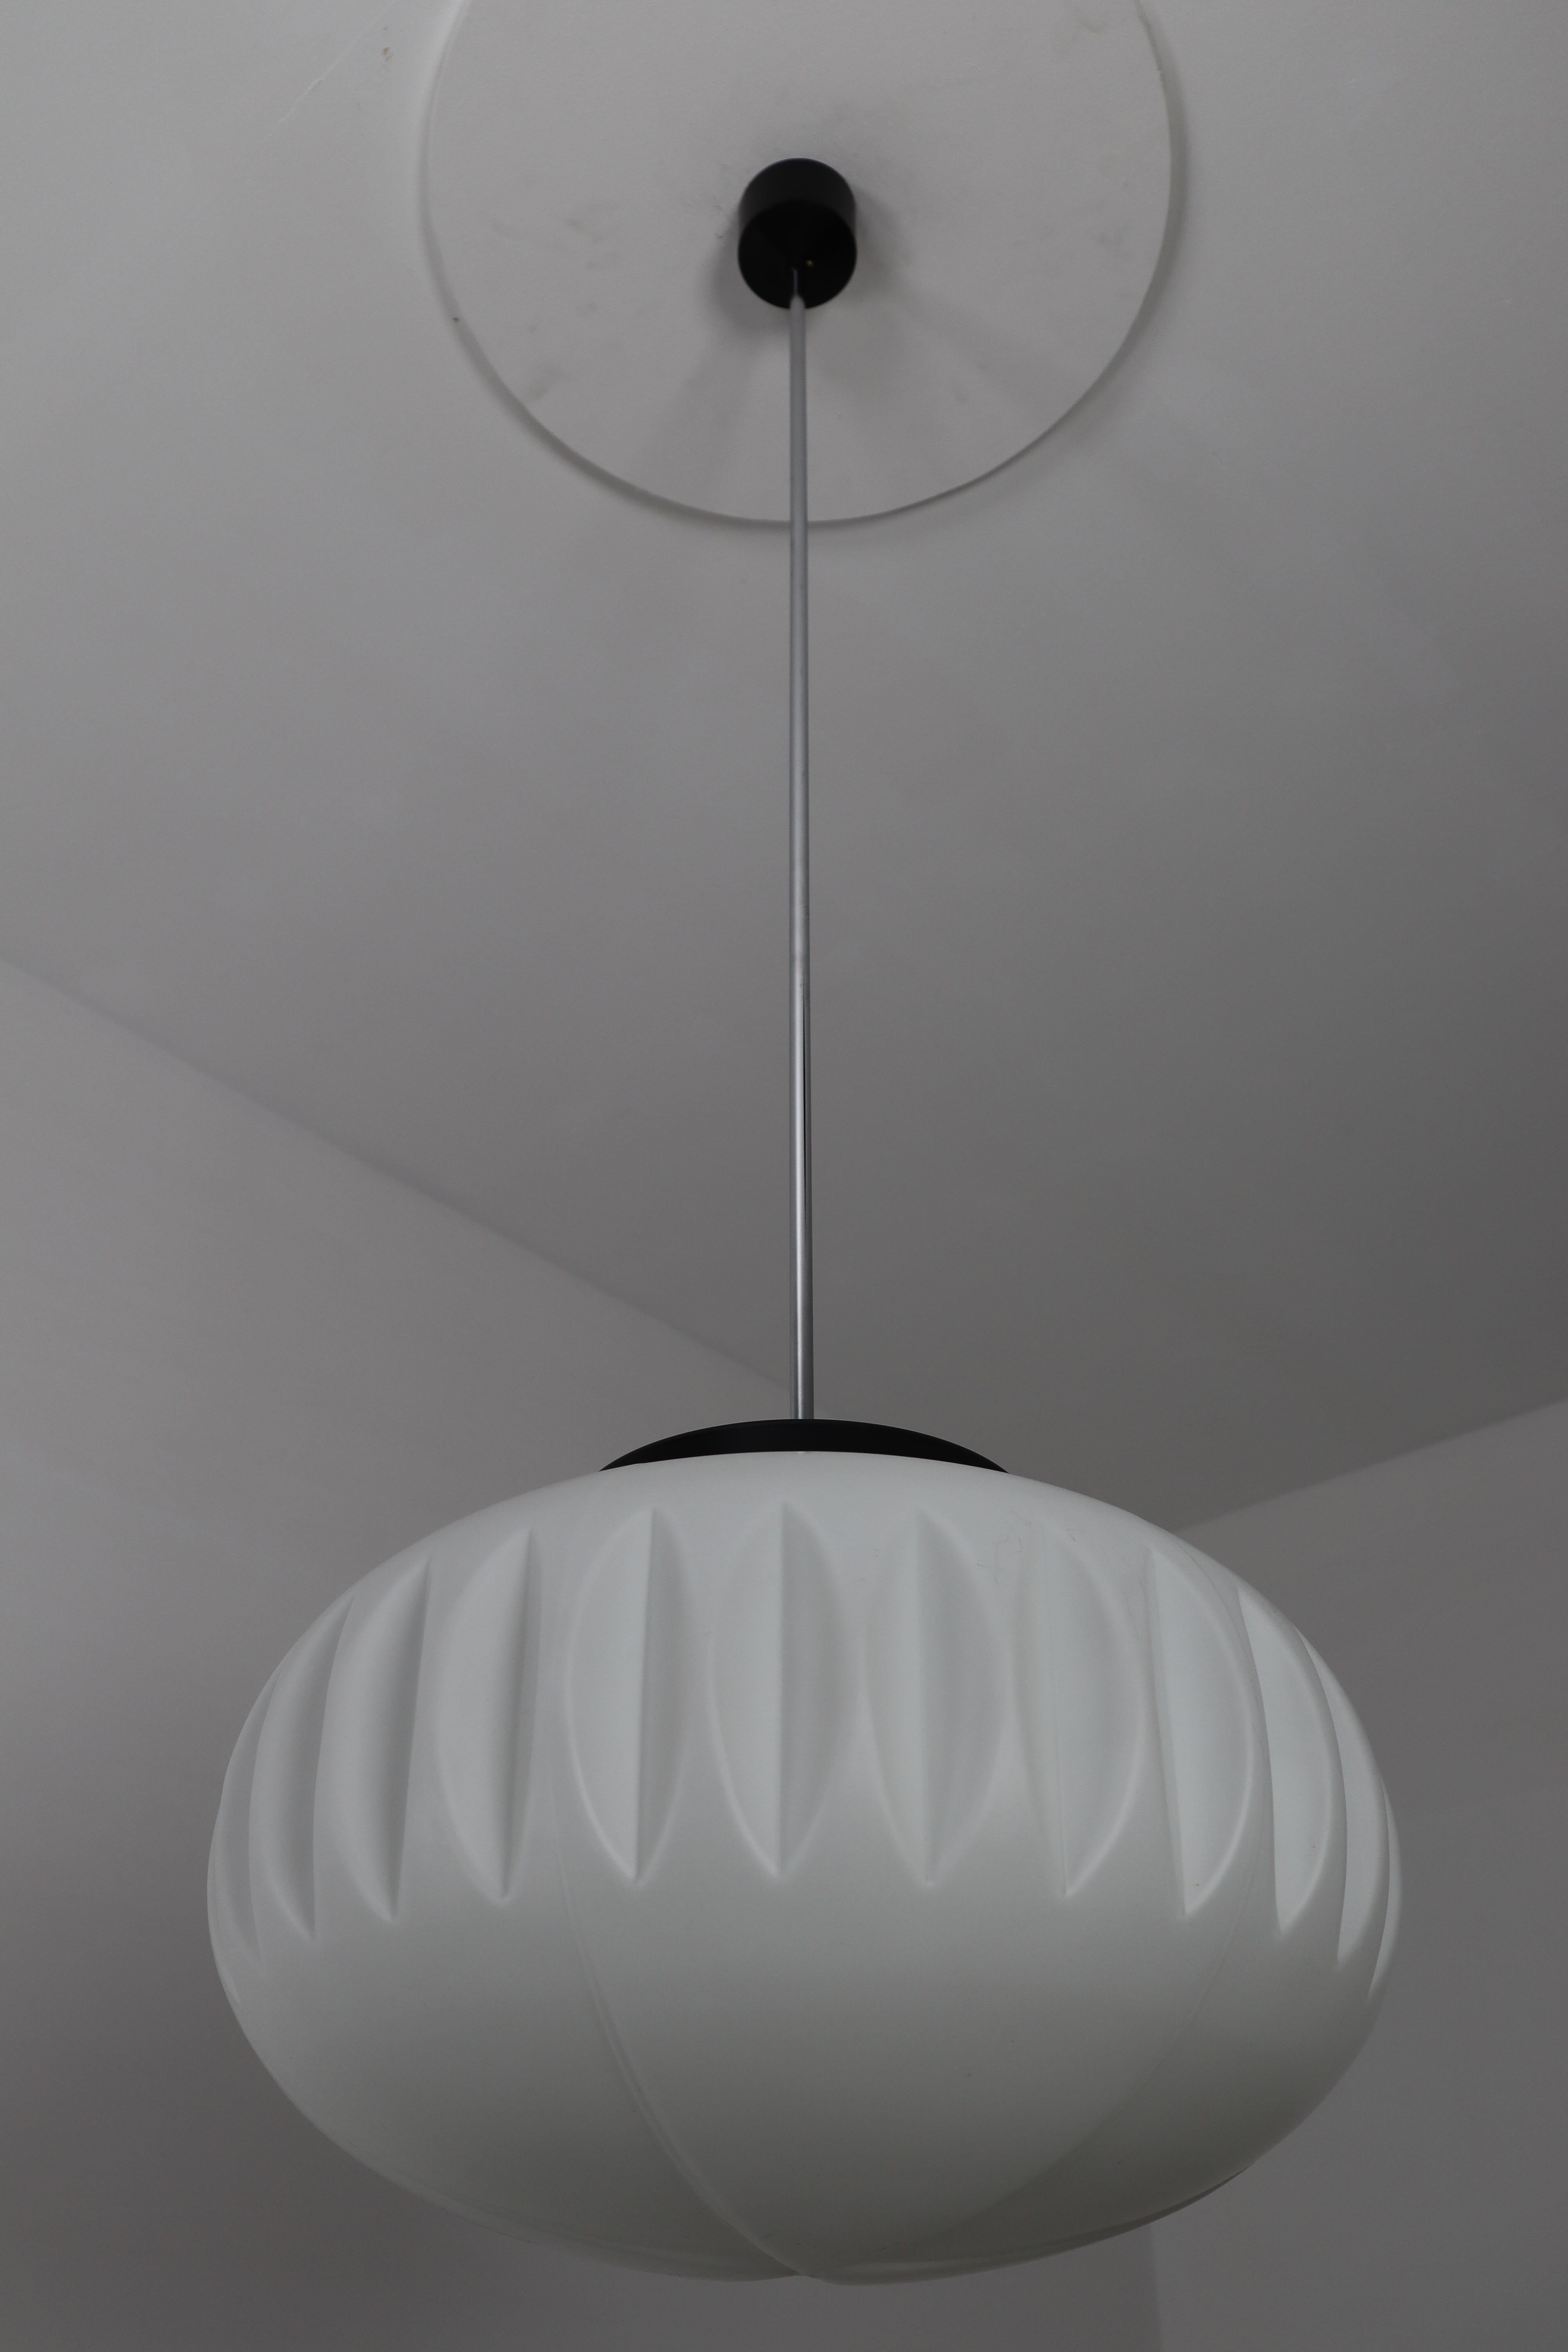 Large pendants, opaline glass, Europe, 1960s.The diffuse light it spreads is very atmospheric. Completed with the opaline glass and metal frame details, these pendants will contribute to a luxurious character of the (hotel-bar) interior. Fitted with